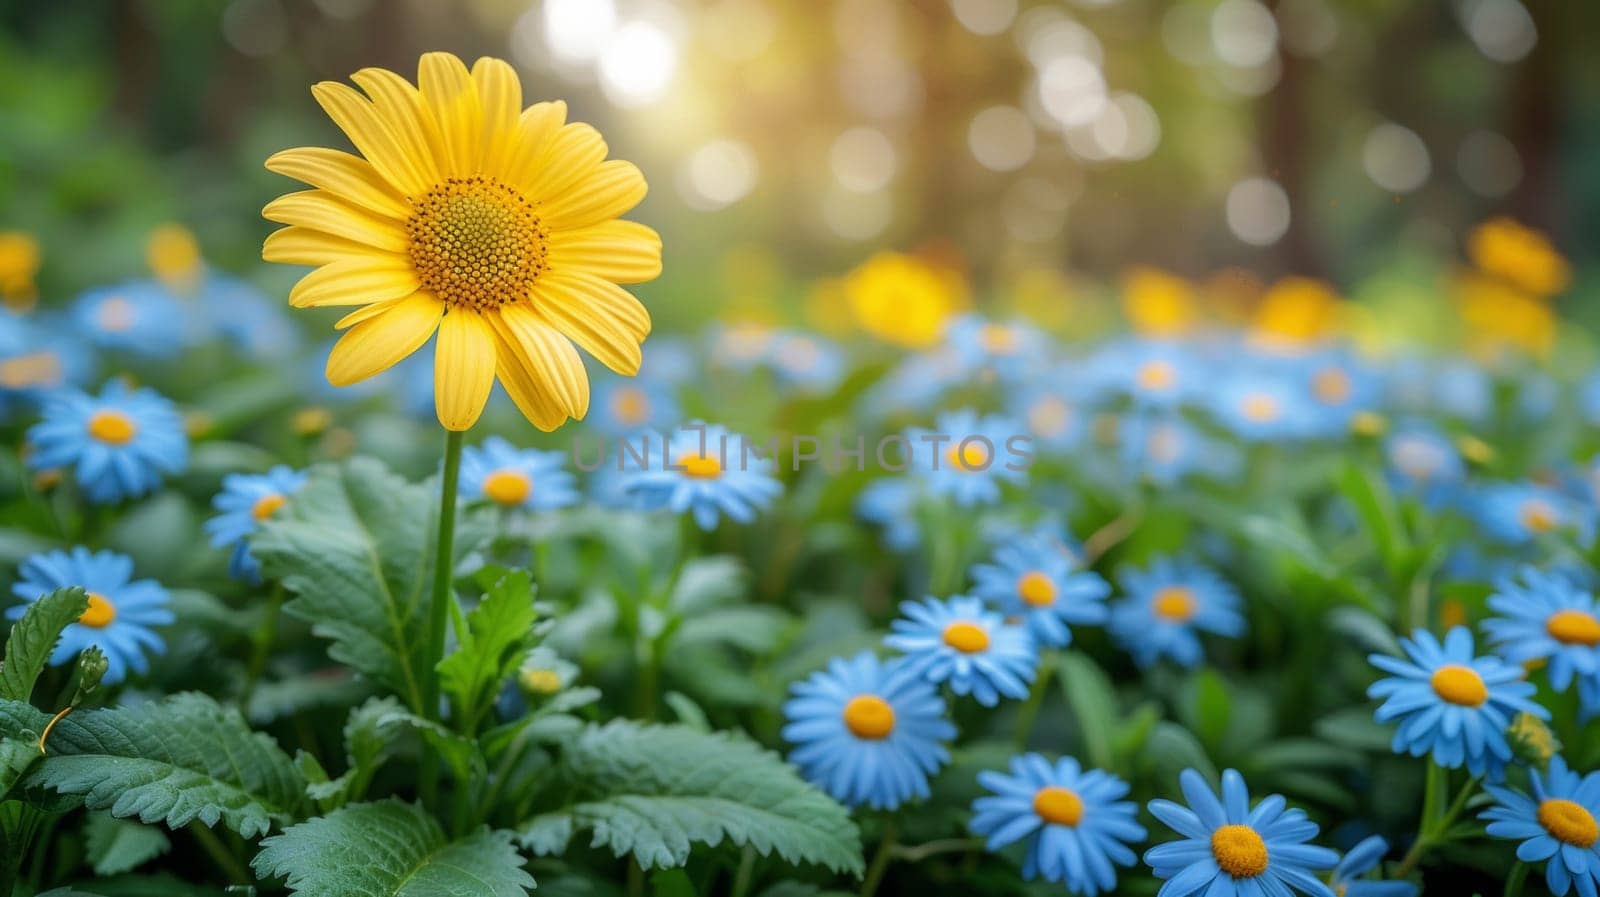 A close up of a yellow flower in the middle of many blue flowers, AI by starush